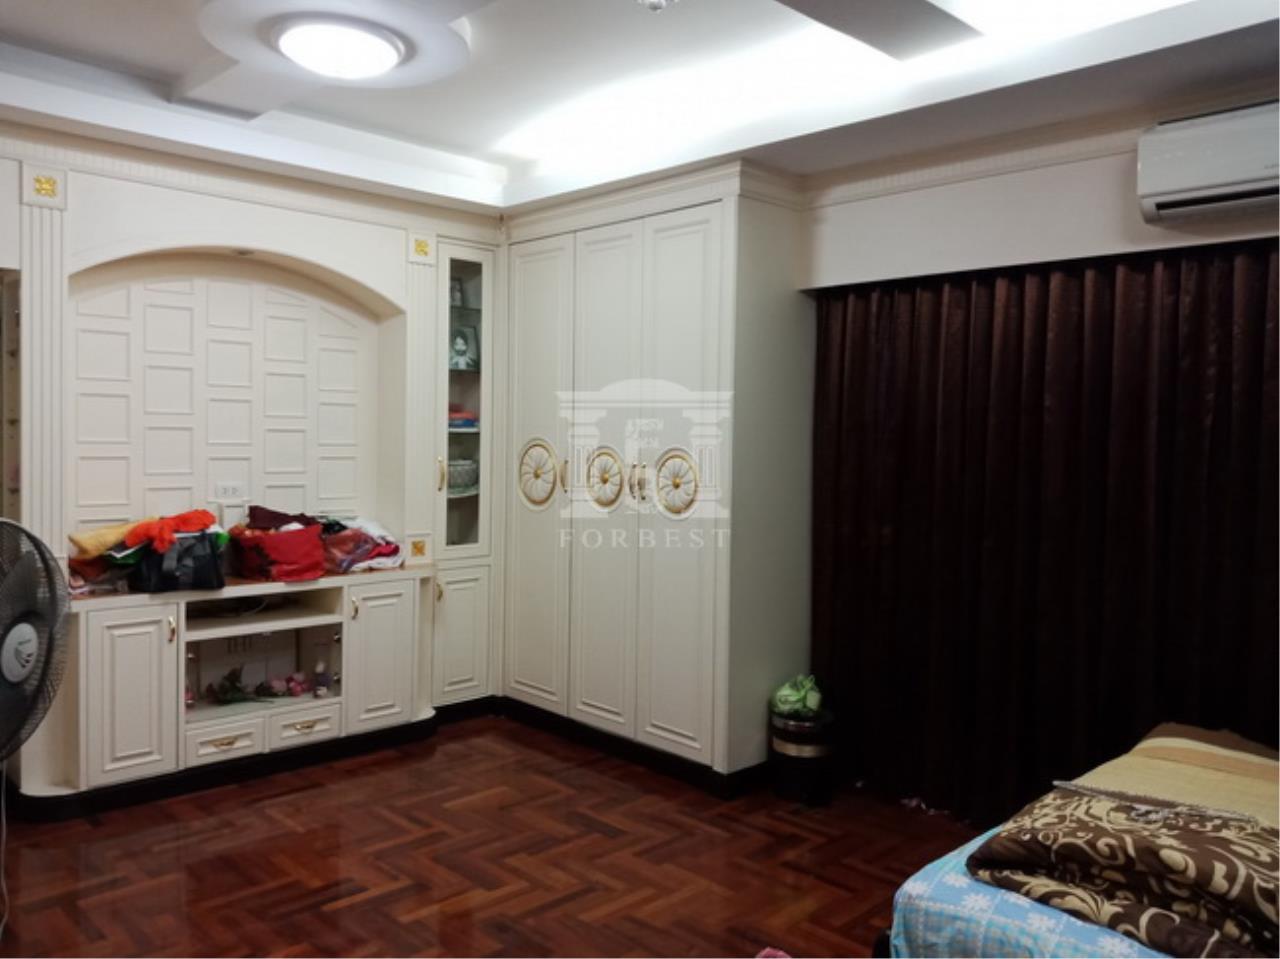 38153 – Ratchada-Thapra road, Townhouse for sale, area 187 Sq.m. Gallery Image